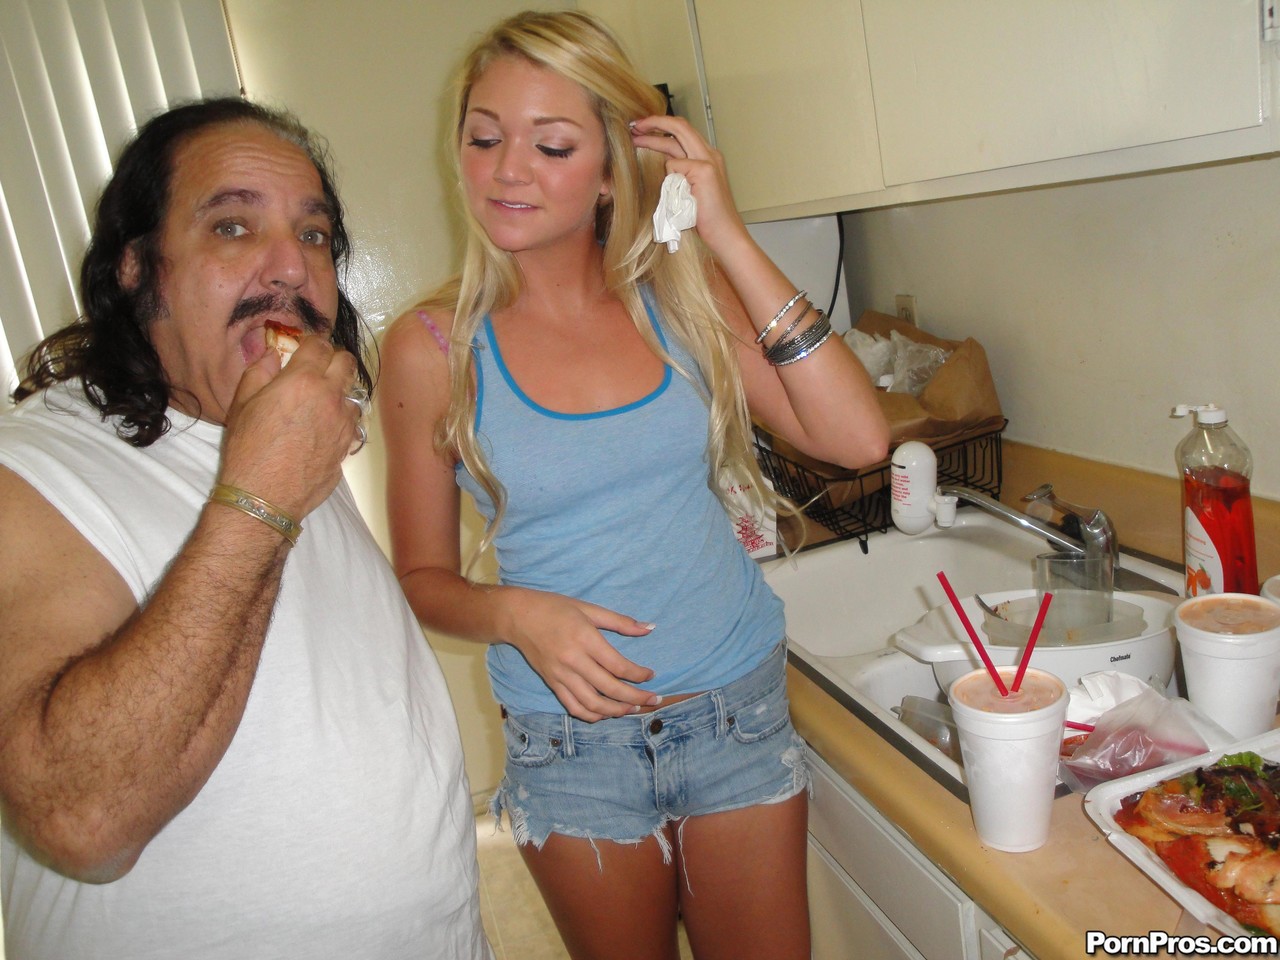 Sweet young blonde Jessie Andrews swallowing and riding an old man's cock foto porno #422620478 | Porn Pros Network Pics, Jessie Andrews, Ron Jeremy, Blonde, porno mobile